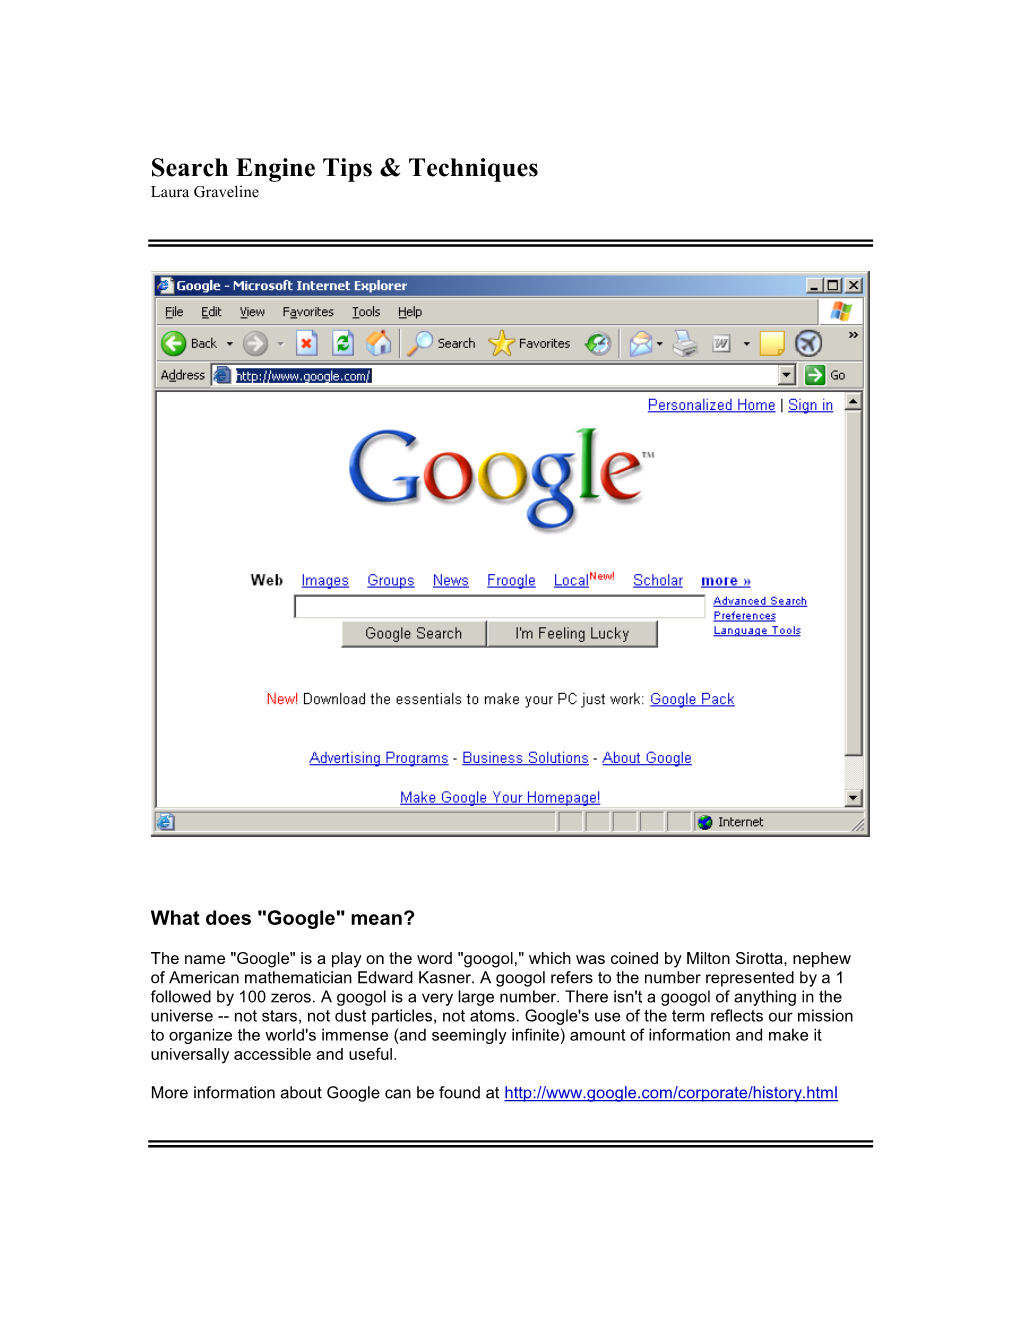 Search Engine Tips & Terms